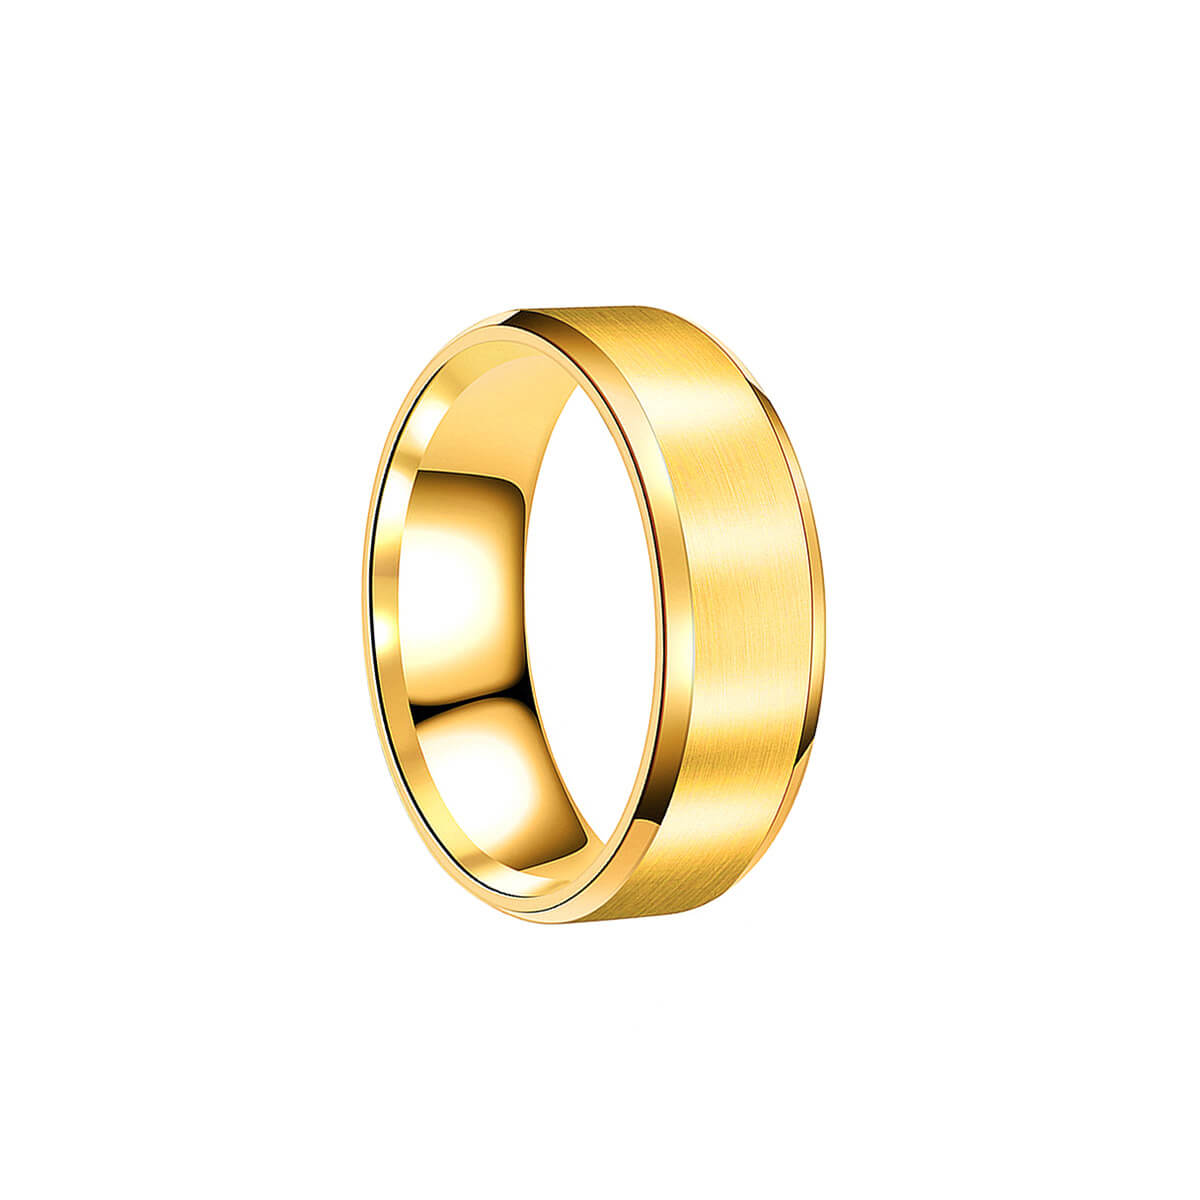 Brushed gold plated steel ring 8mm (Steel 316L)